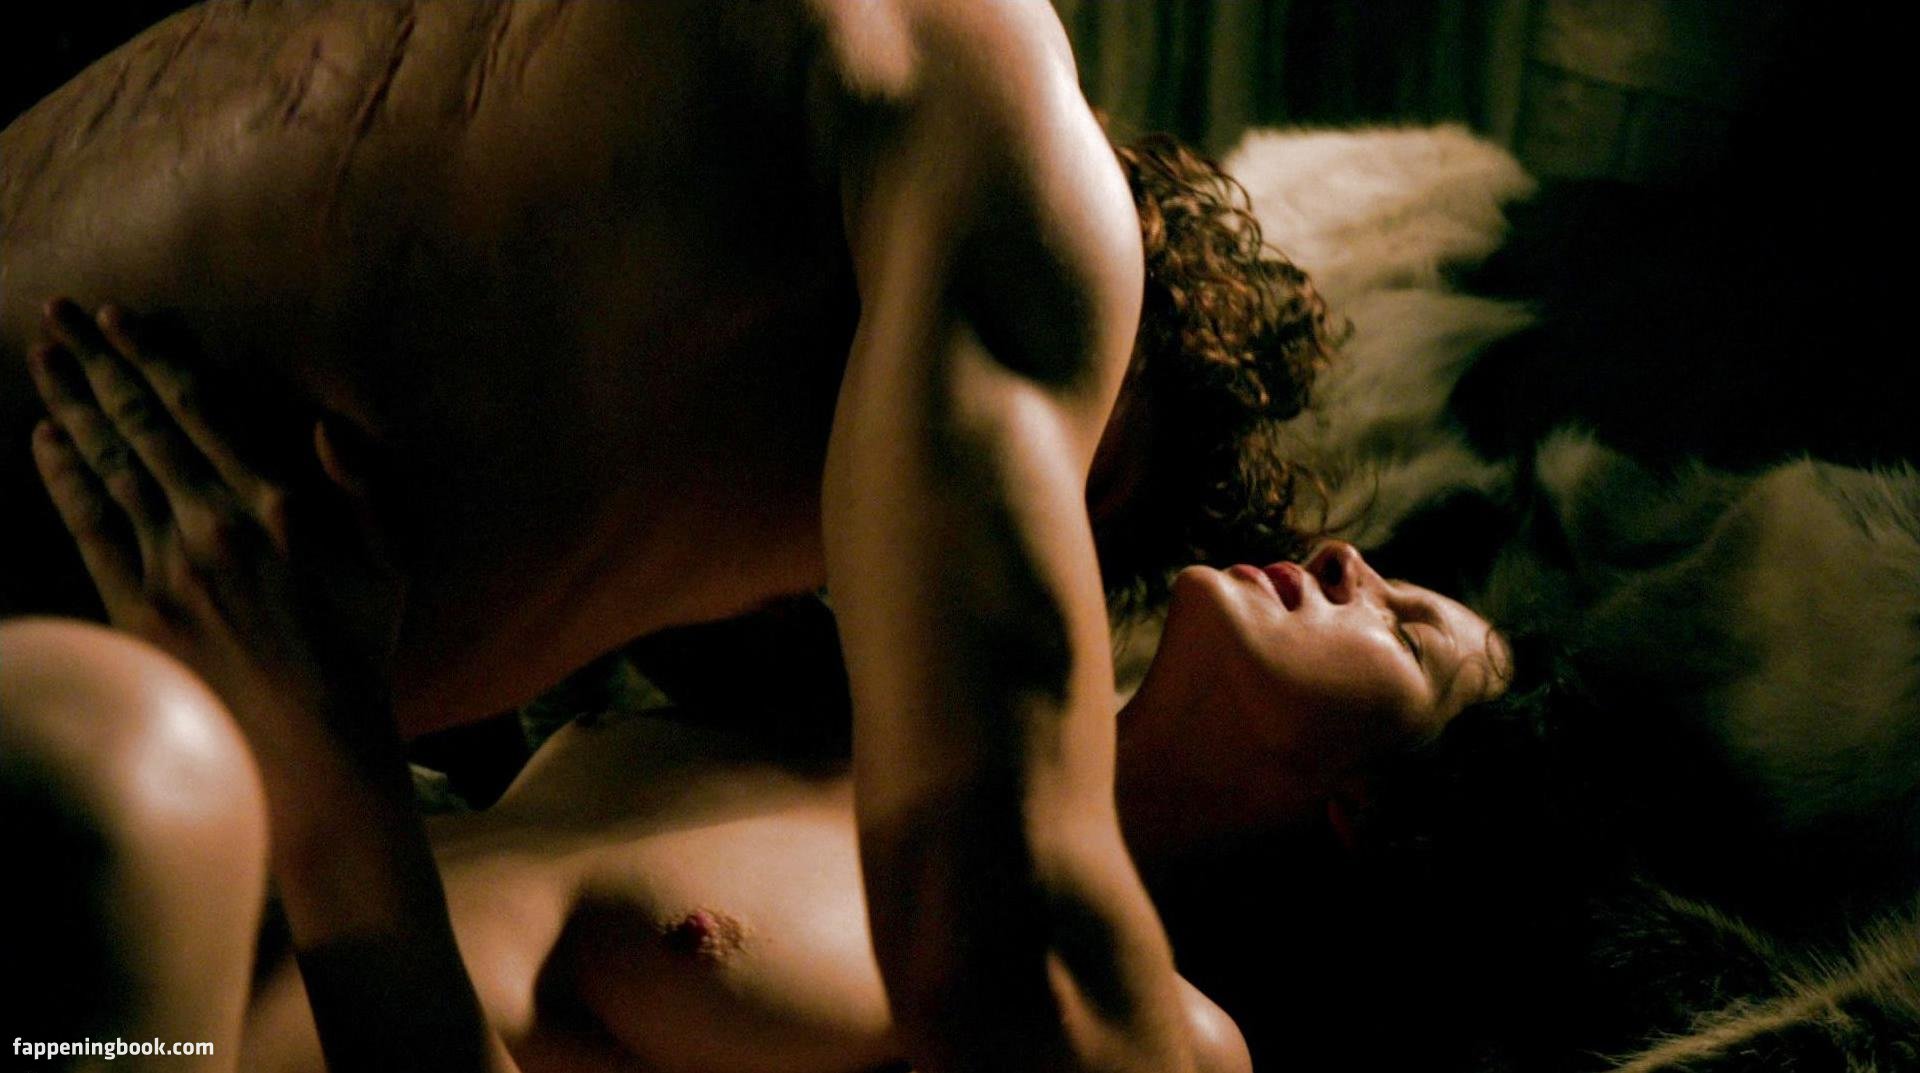 Caitriona Balfe Nude, The Fappening - Photo #92619 - FappeningBook.